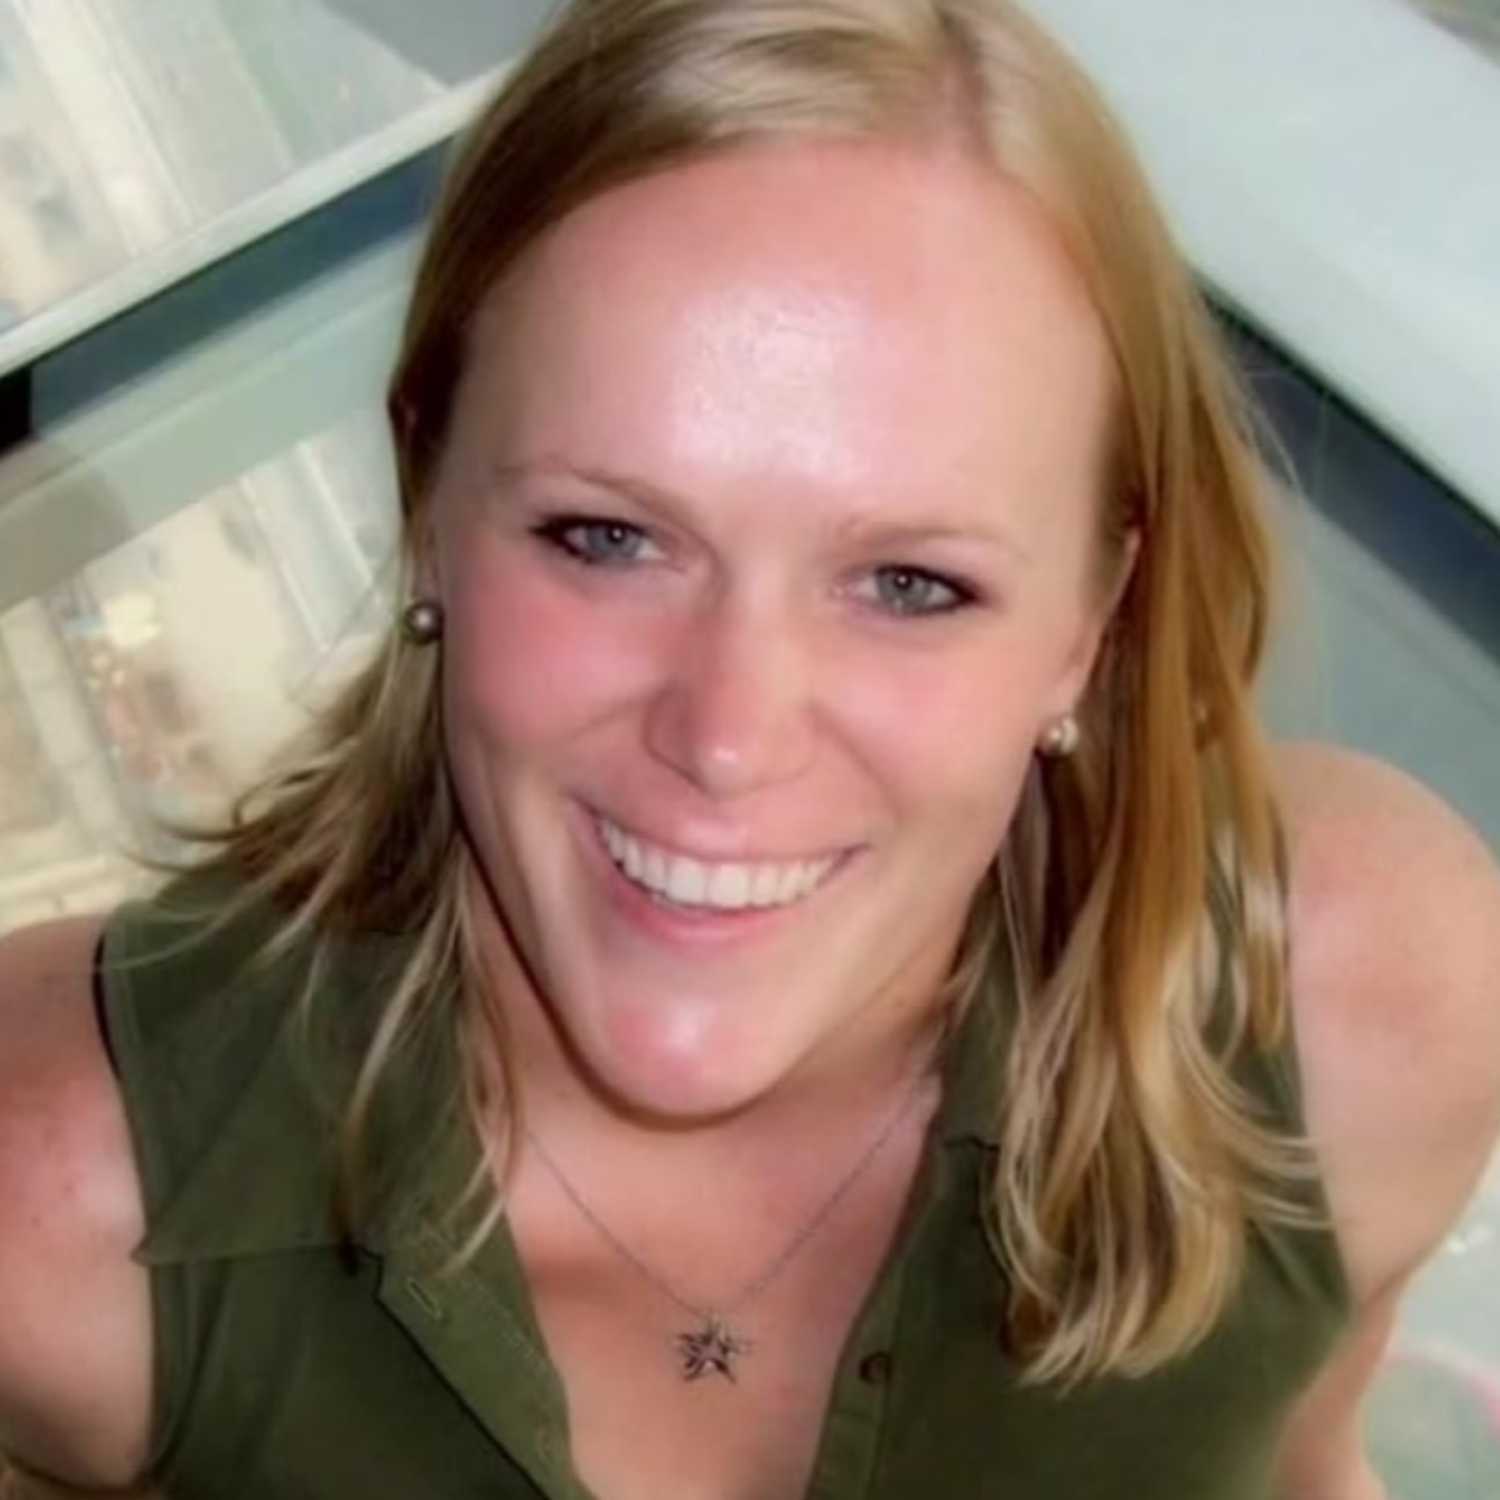 The Lululemon Murder- How Did Brittany Norwood Go From Victim to Murderer?